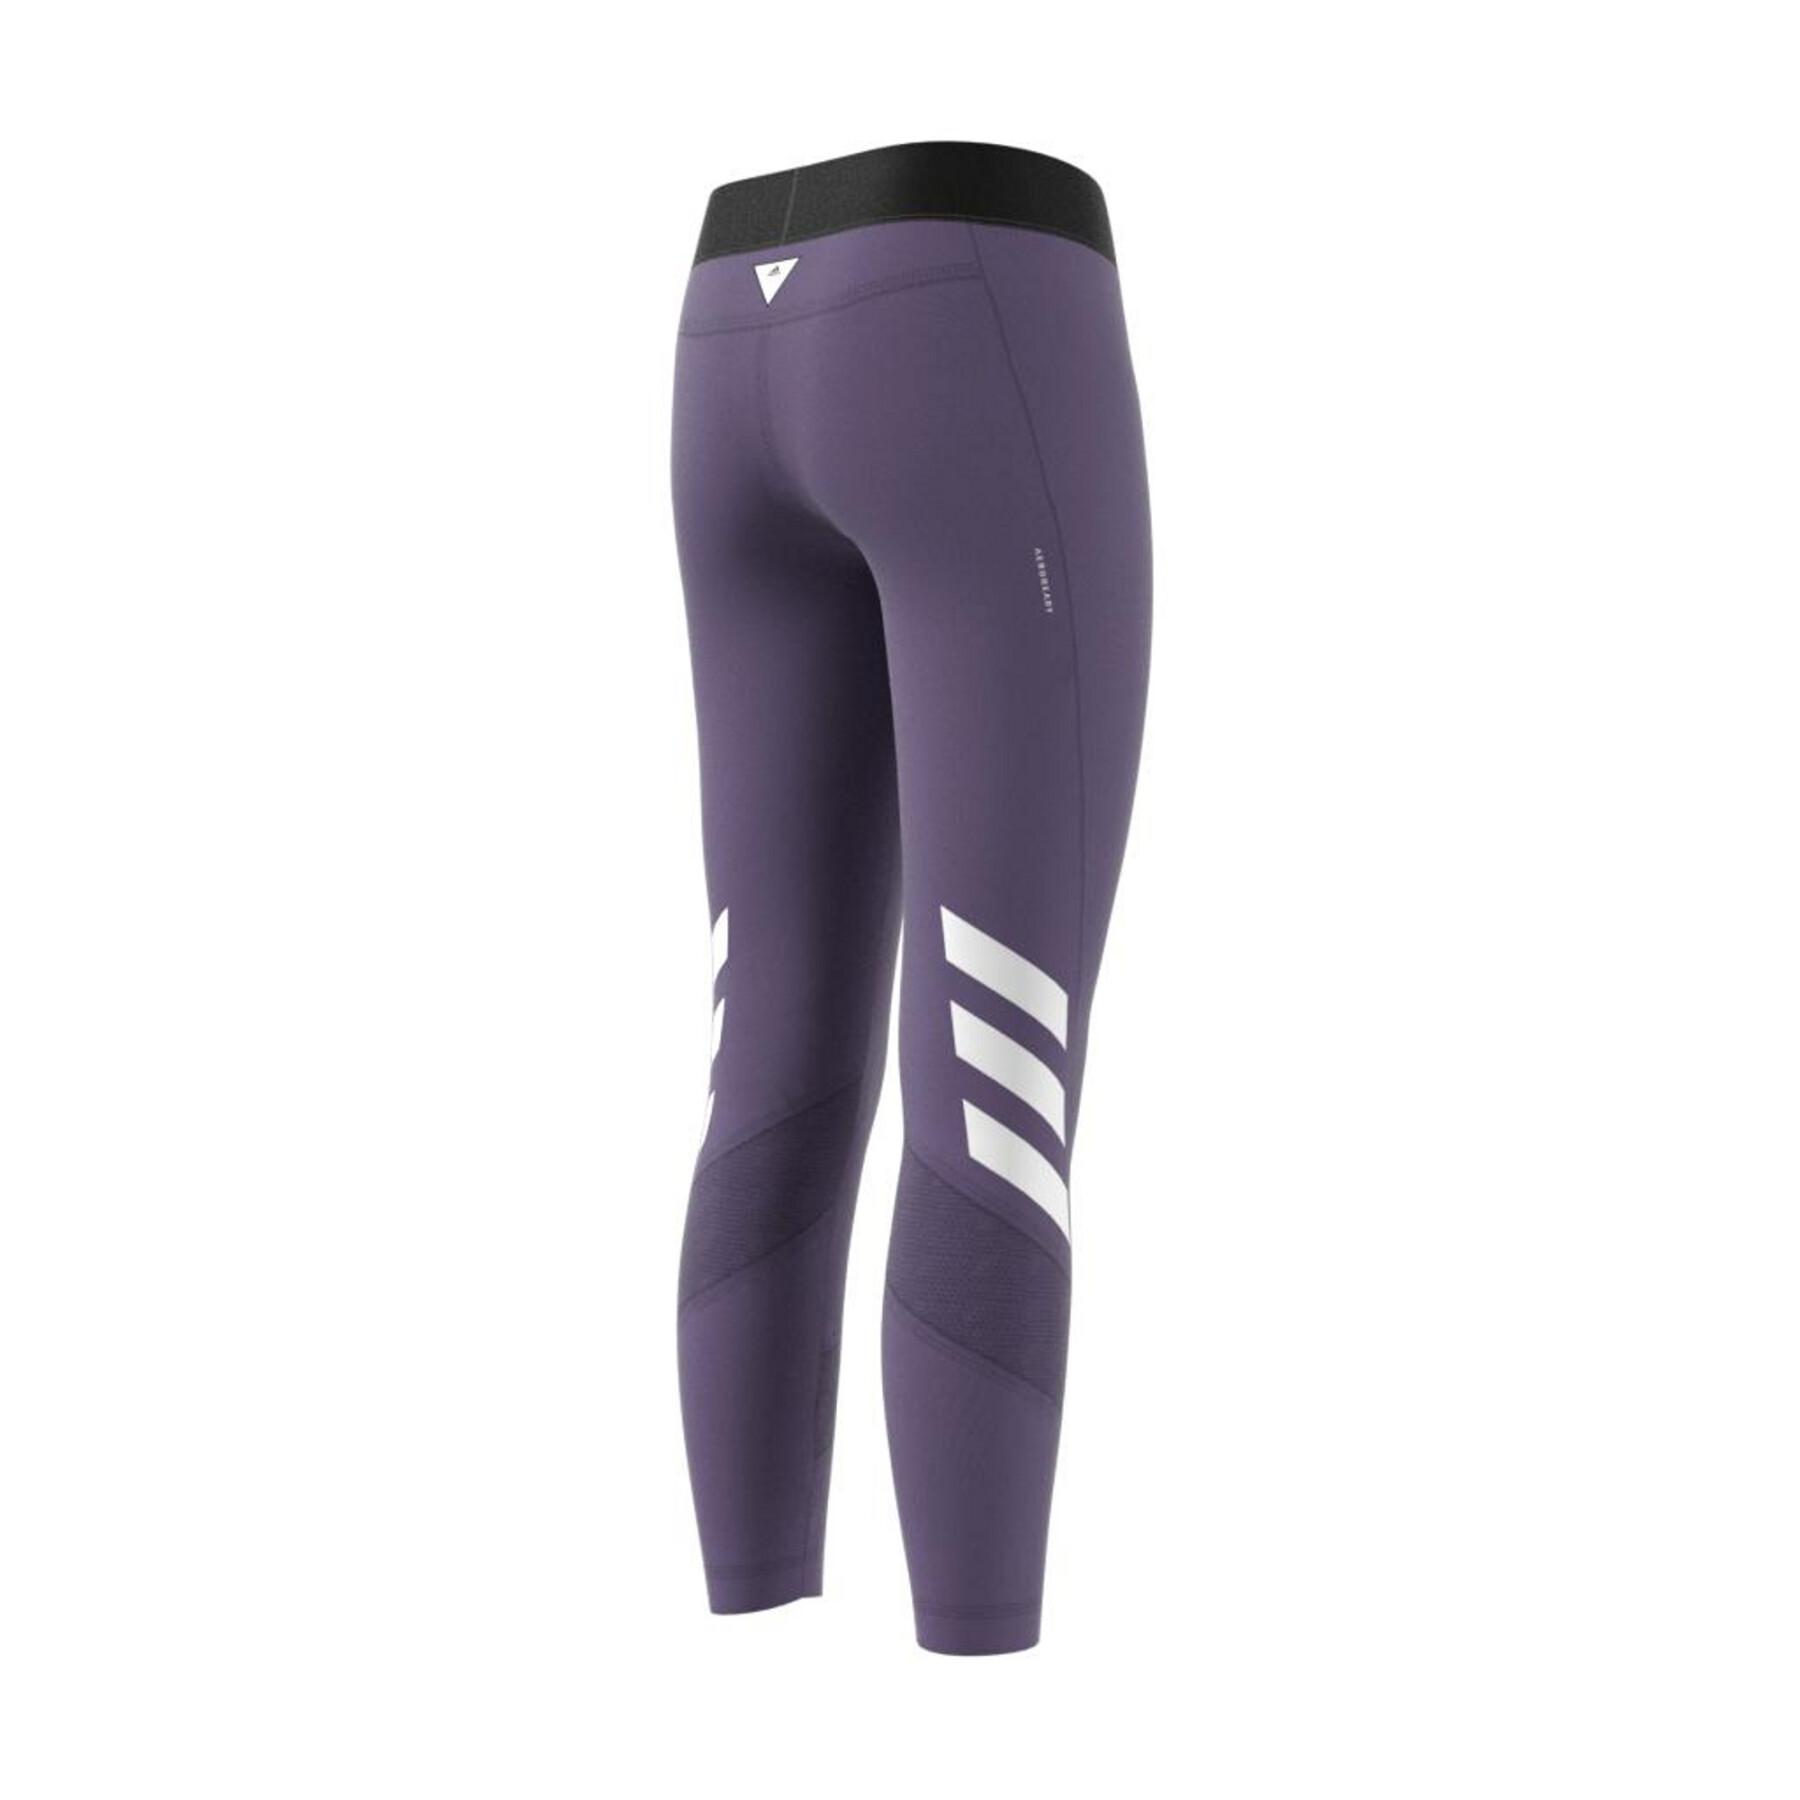 Girl's tights adidas The Future Today